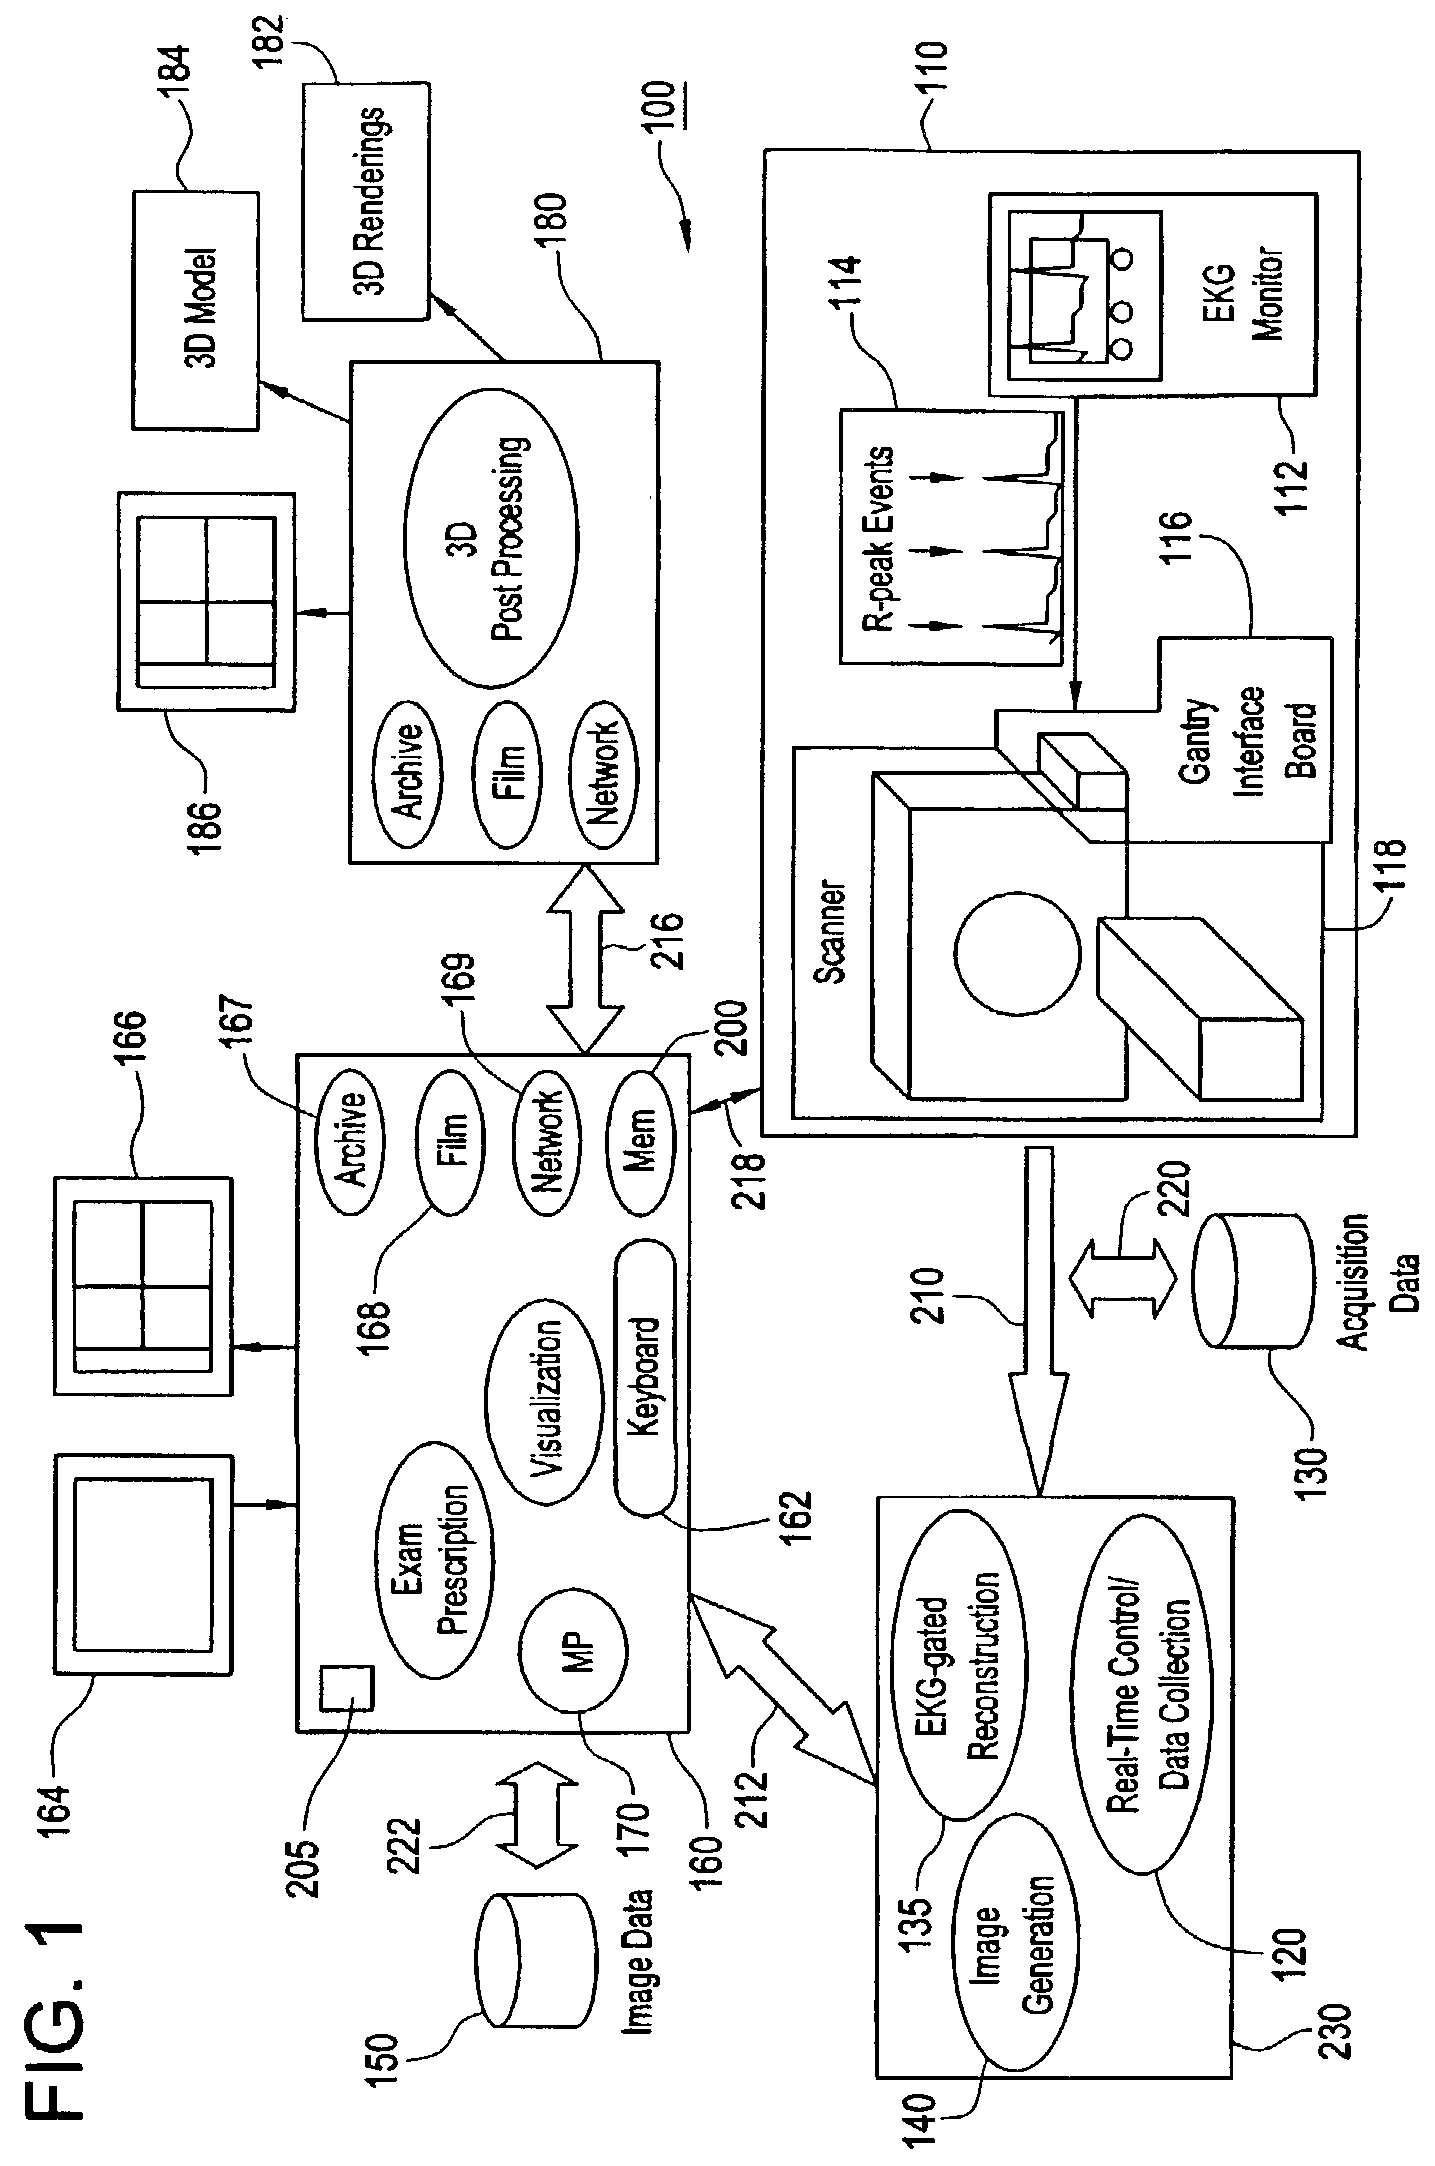 Method and apparatus for medical intervention procedure planning